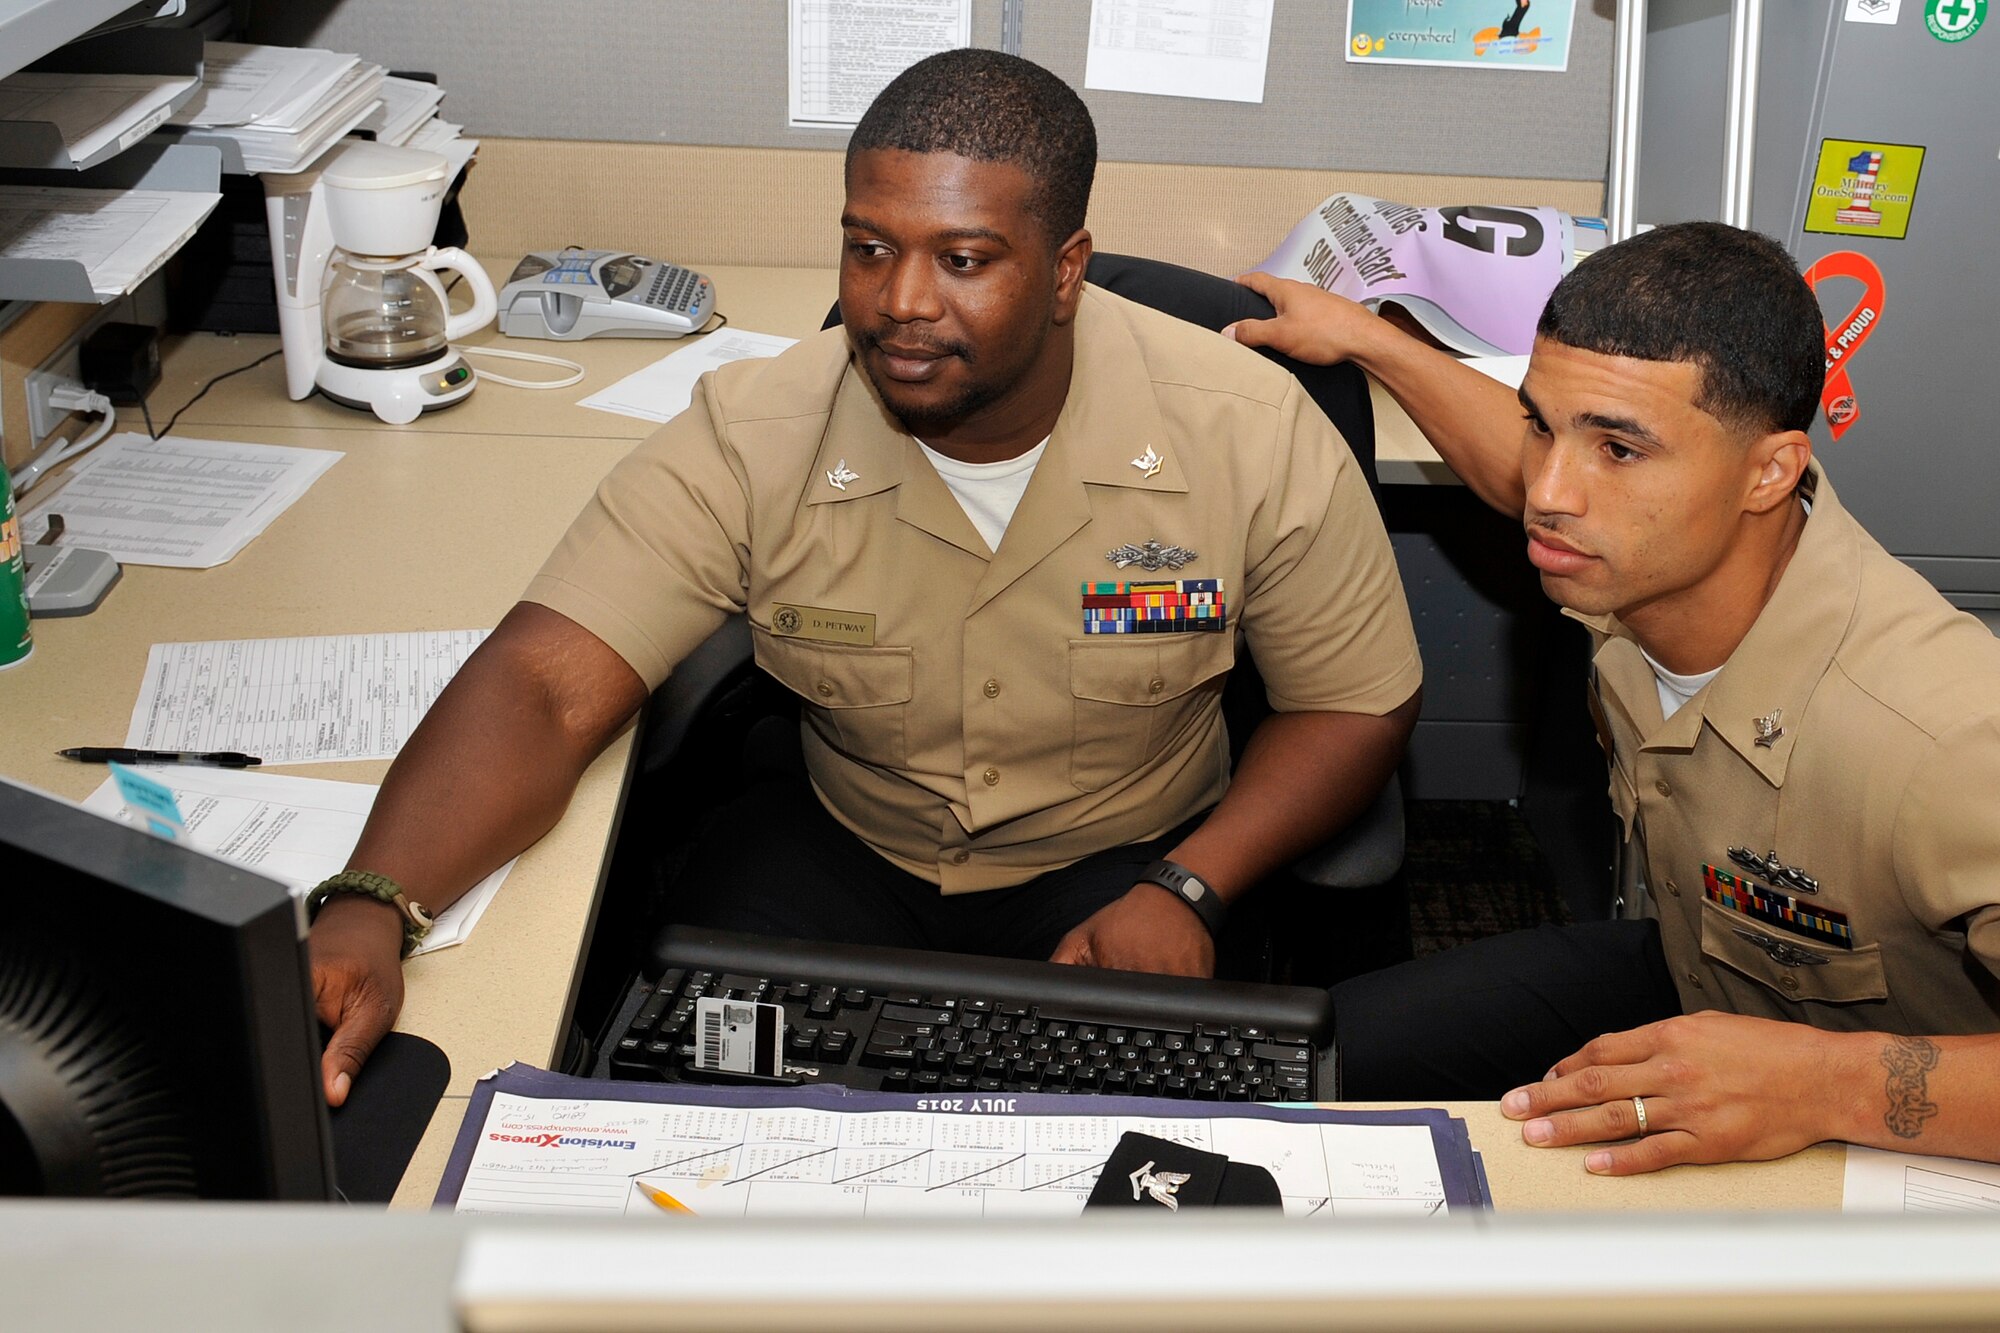 U.S. Navy Petty Officer Deshawn Petway and Petty Officer Ronnie Frost, gather to look at some training records July 28. Petway and Frost are members of the Omaha Stockmen semi-pro football team and work at the Navy Operational Support Center – Omaha, Offutt Air Force Base, Nebraska. (U.S. Air Force photo by Jeff W. Gates/Released)